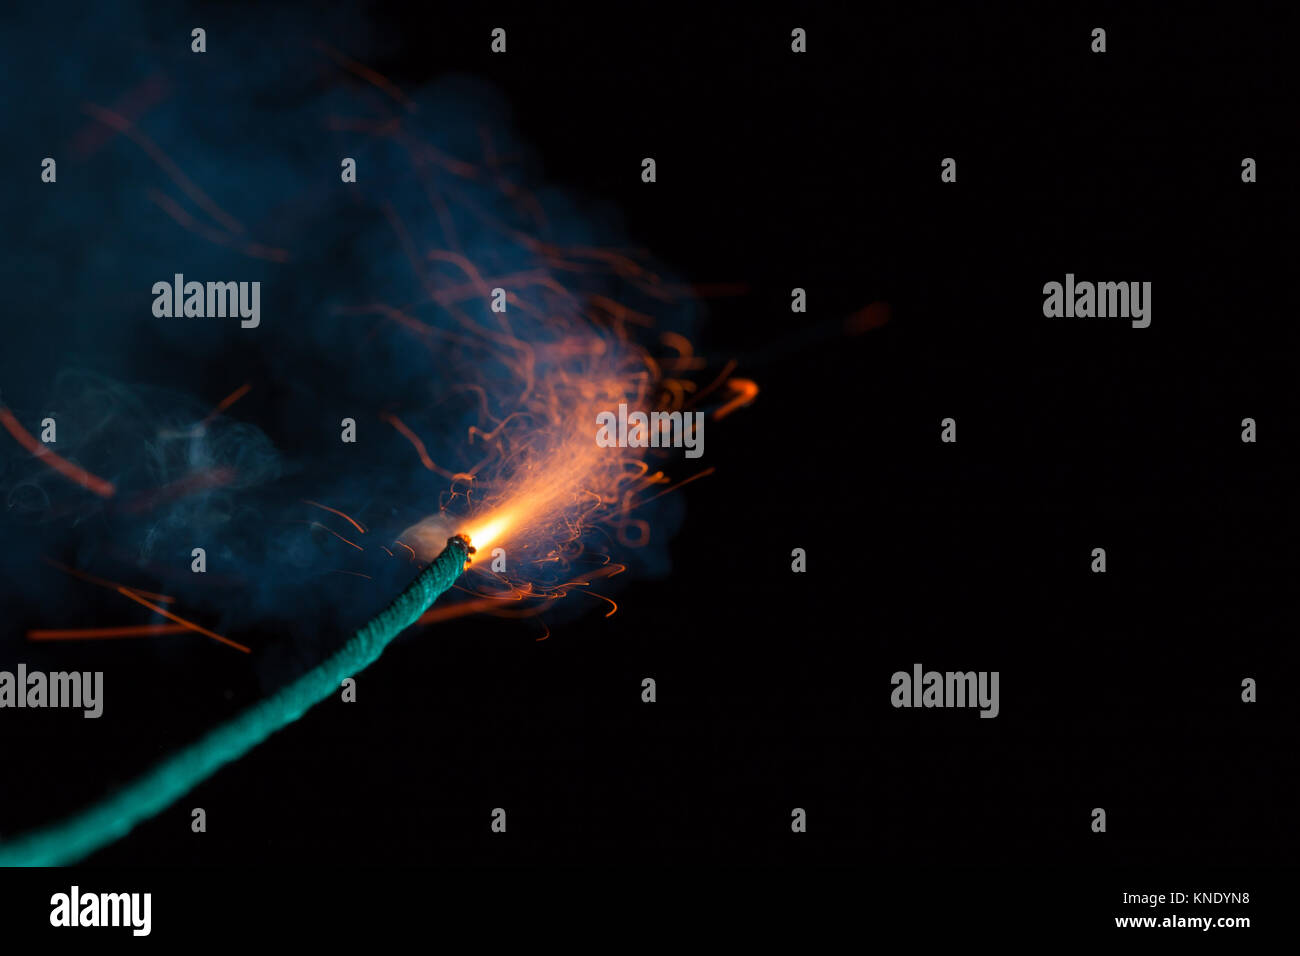 Burning fuse with sparks and blue smoke on black background Stock Photo